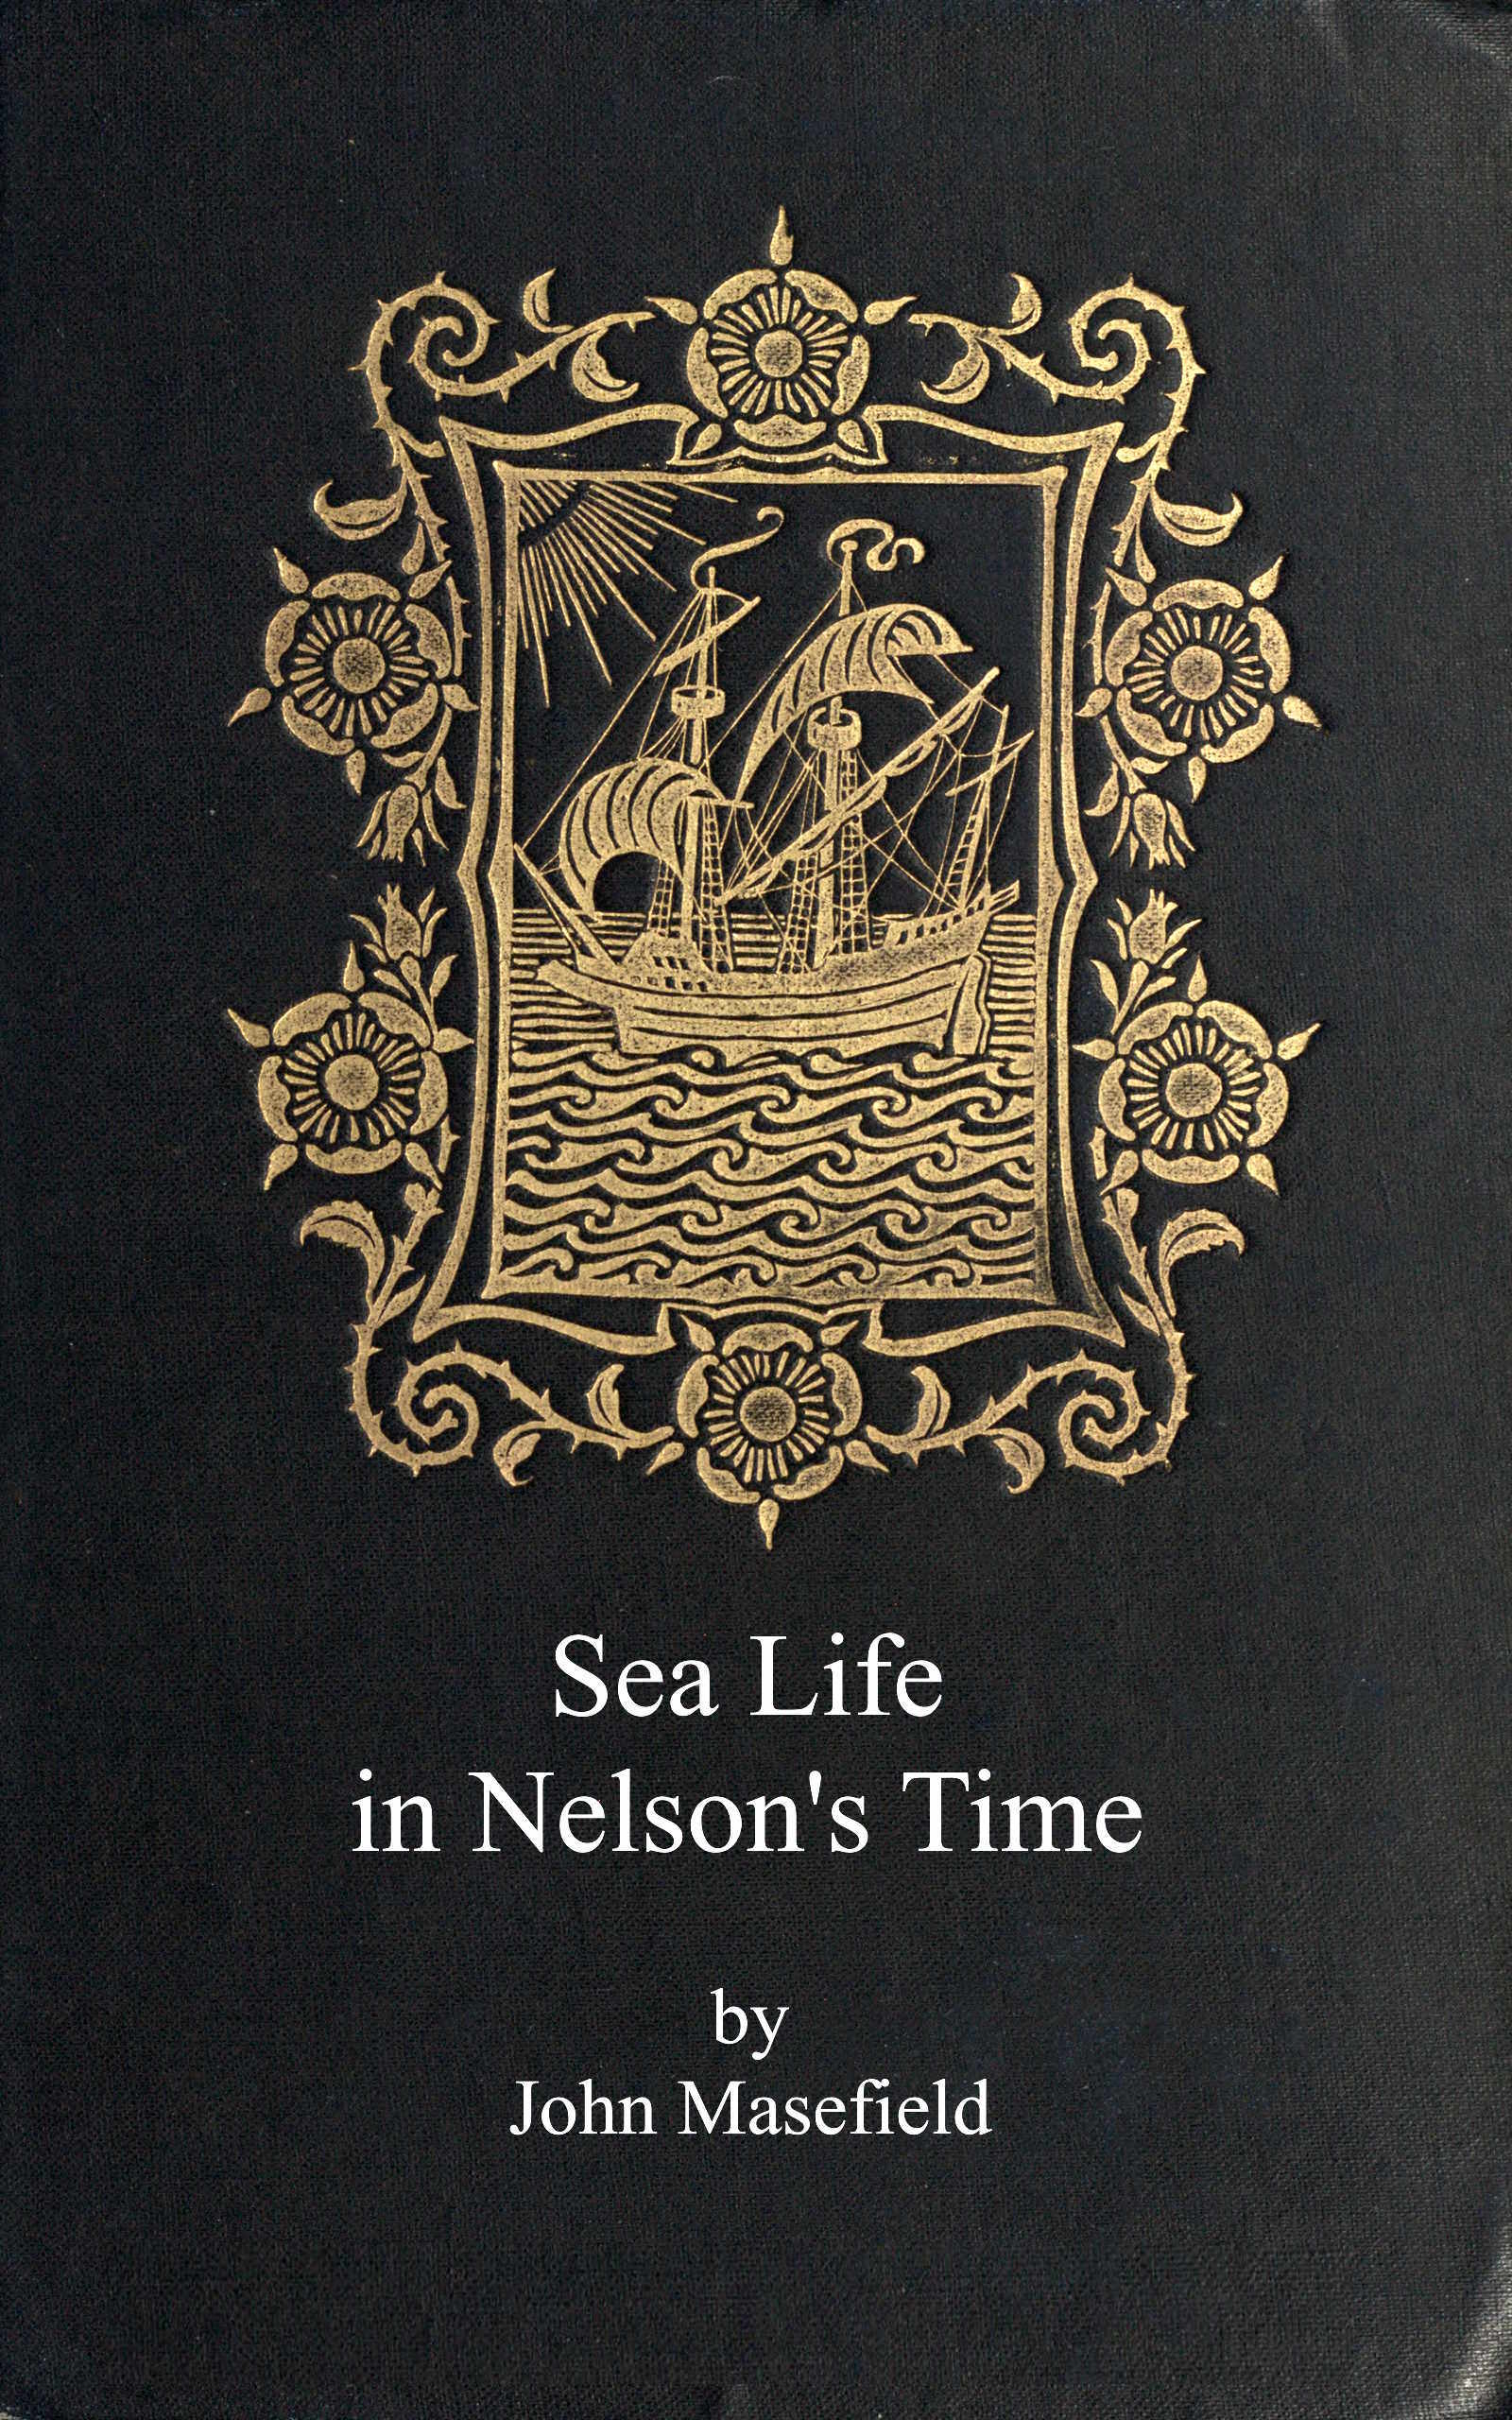 Sea life in Nelson's time